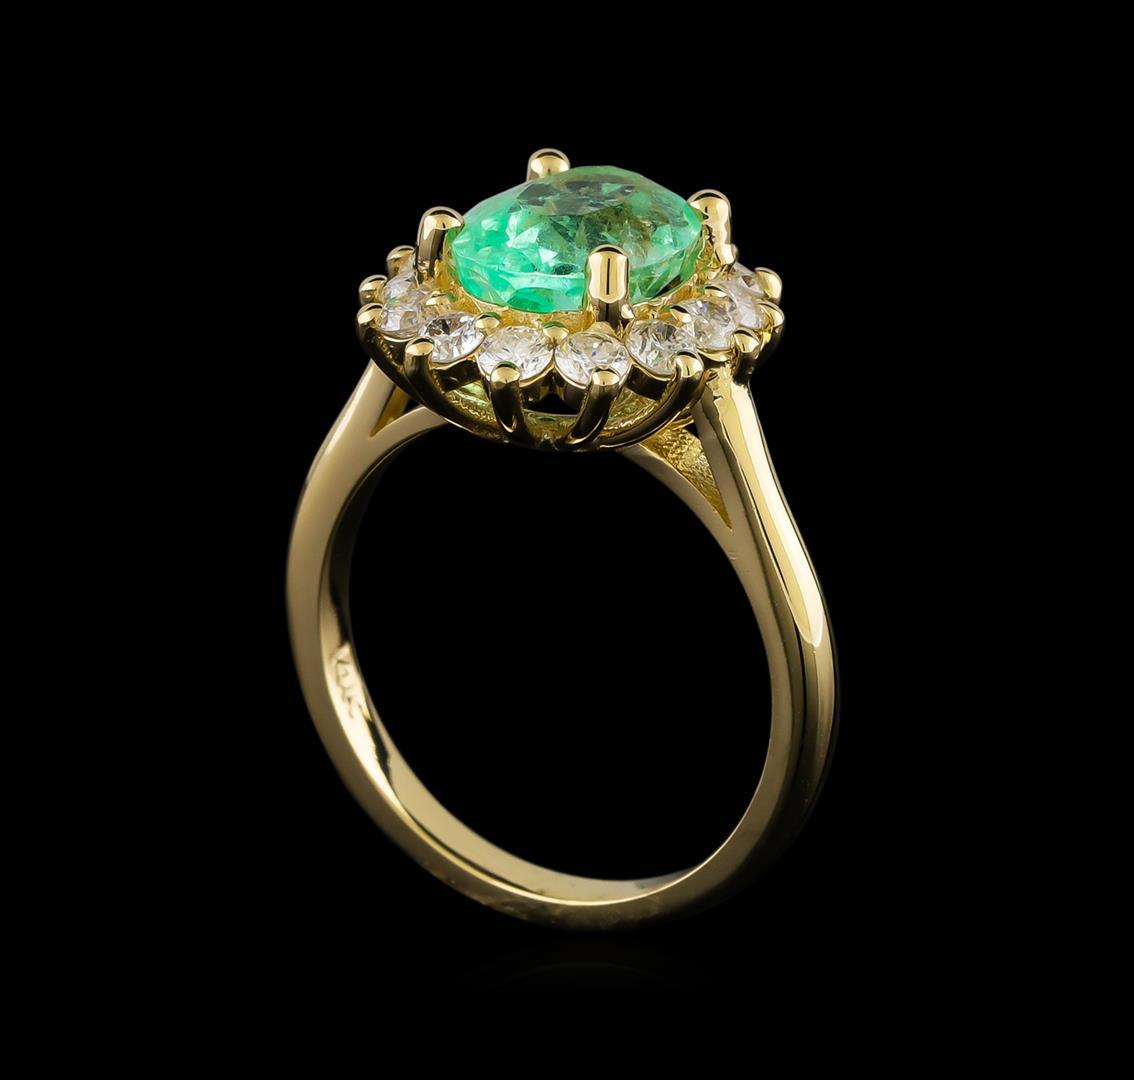 2.31 ctw Emerald and Diamond Ring - 14KT Yellow Gold